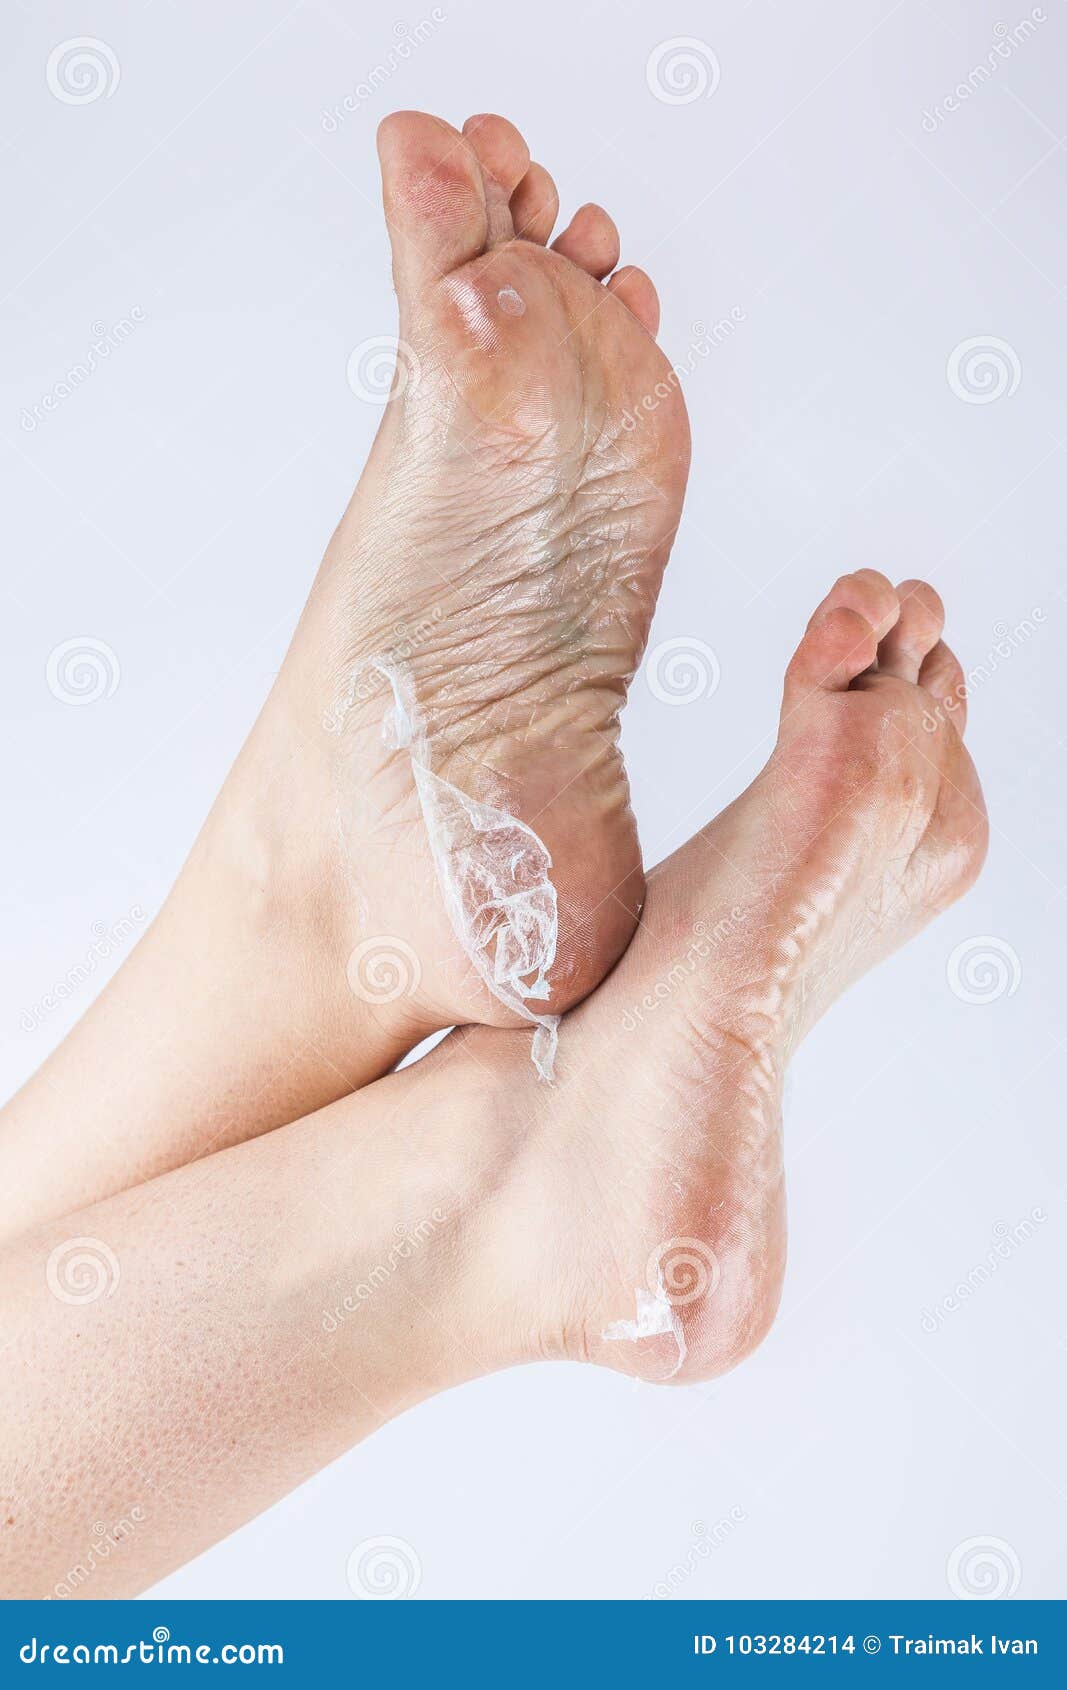 How to Prevent Cracked Heels? - Dr Venus